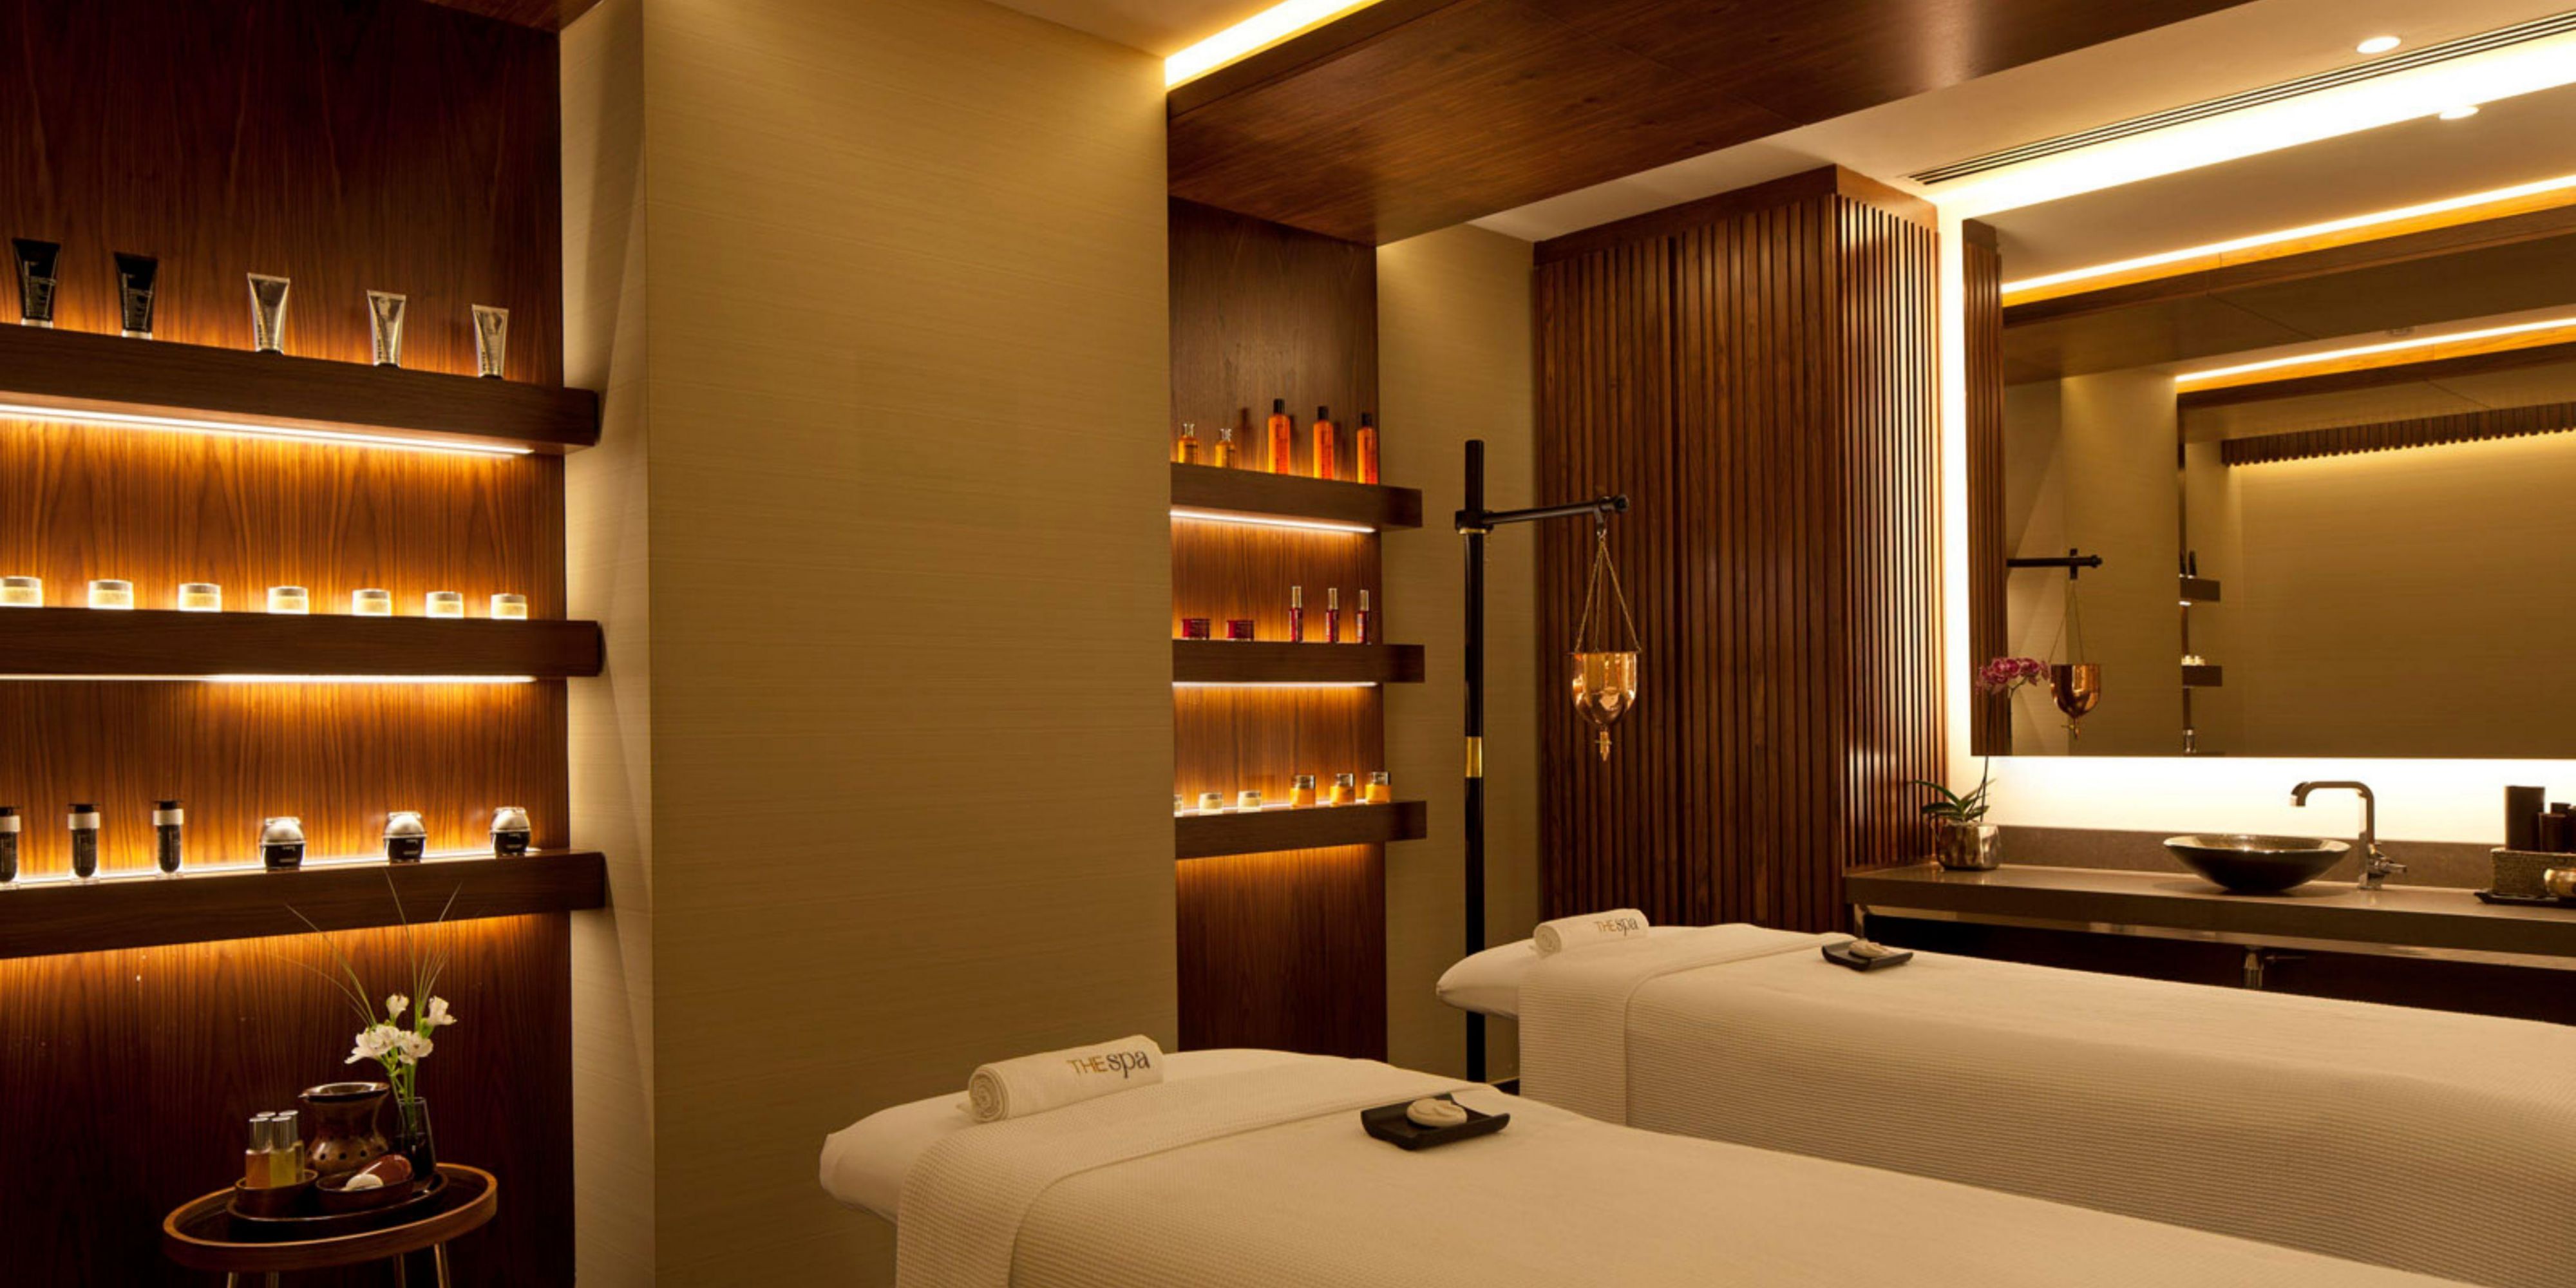 Intimate and serene, THE Spa boasts seven treatment rooms including a luxury couples’ suite, saunas, and a relaxation space. Each treatment on the diverse menu has been selected from world cultures to present you with the finest collection of traditional and innovative experiences. No matter what you choose, you'll feel rejuvenated at THE Spa. 